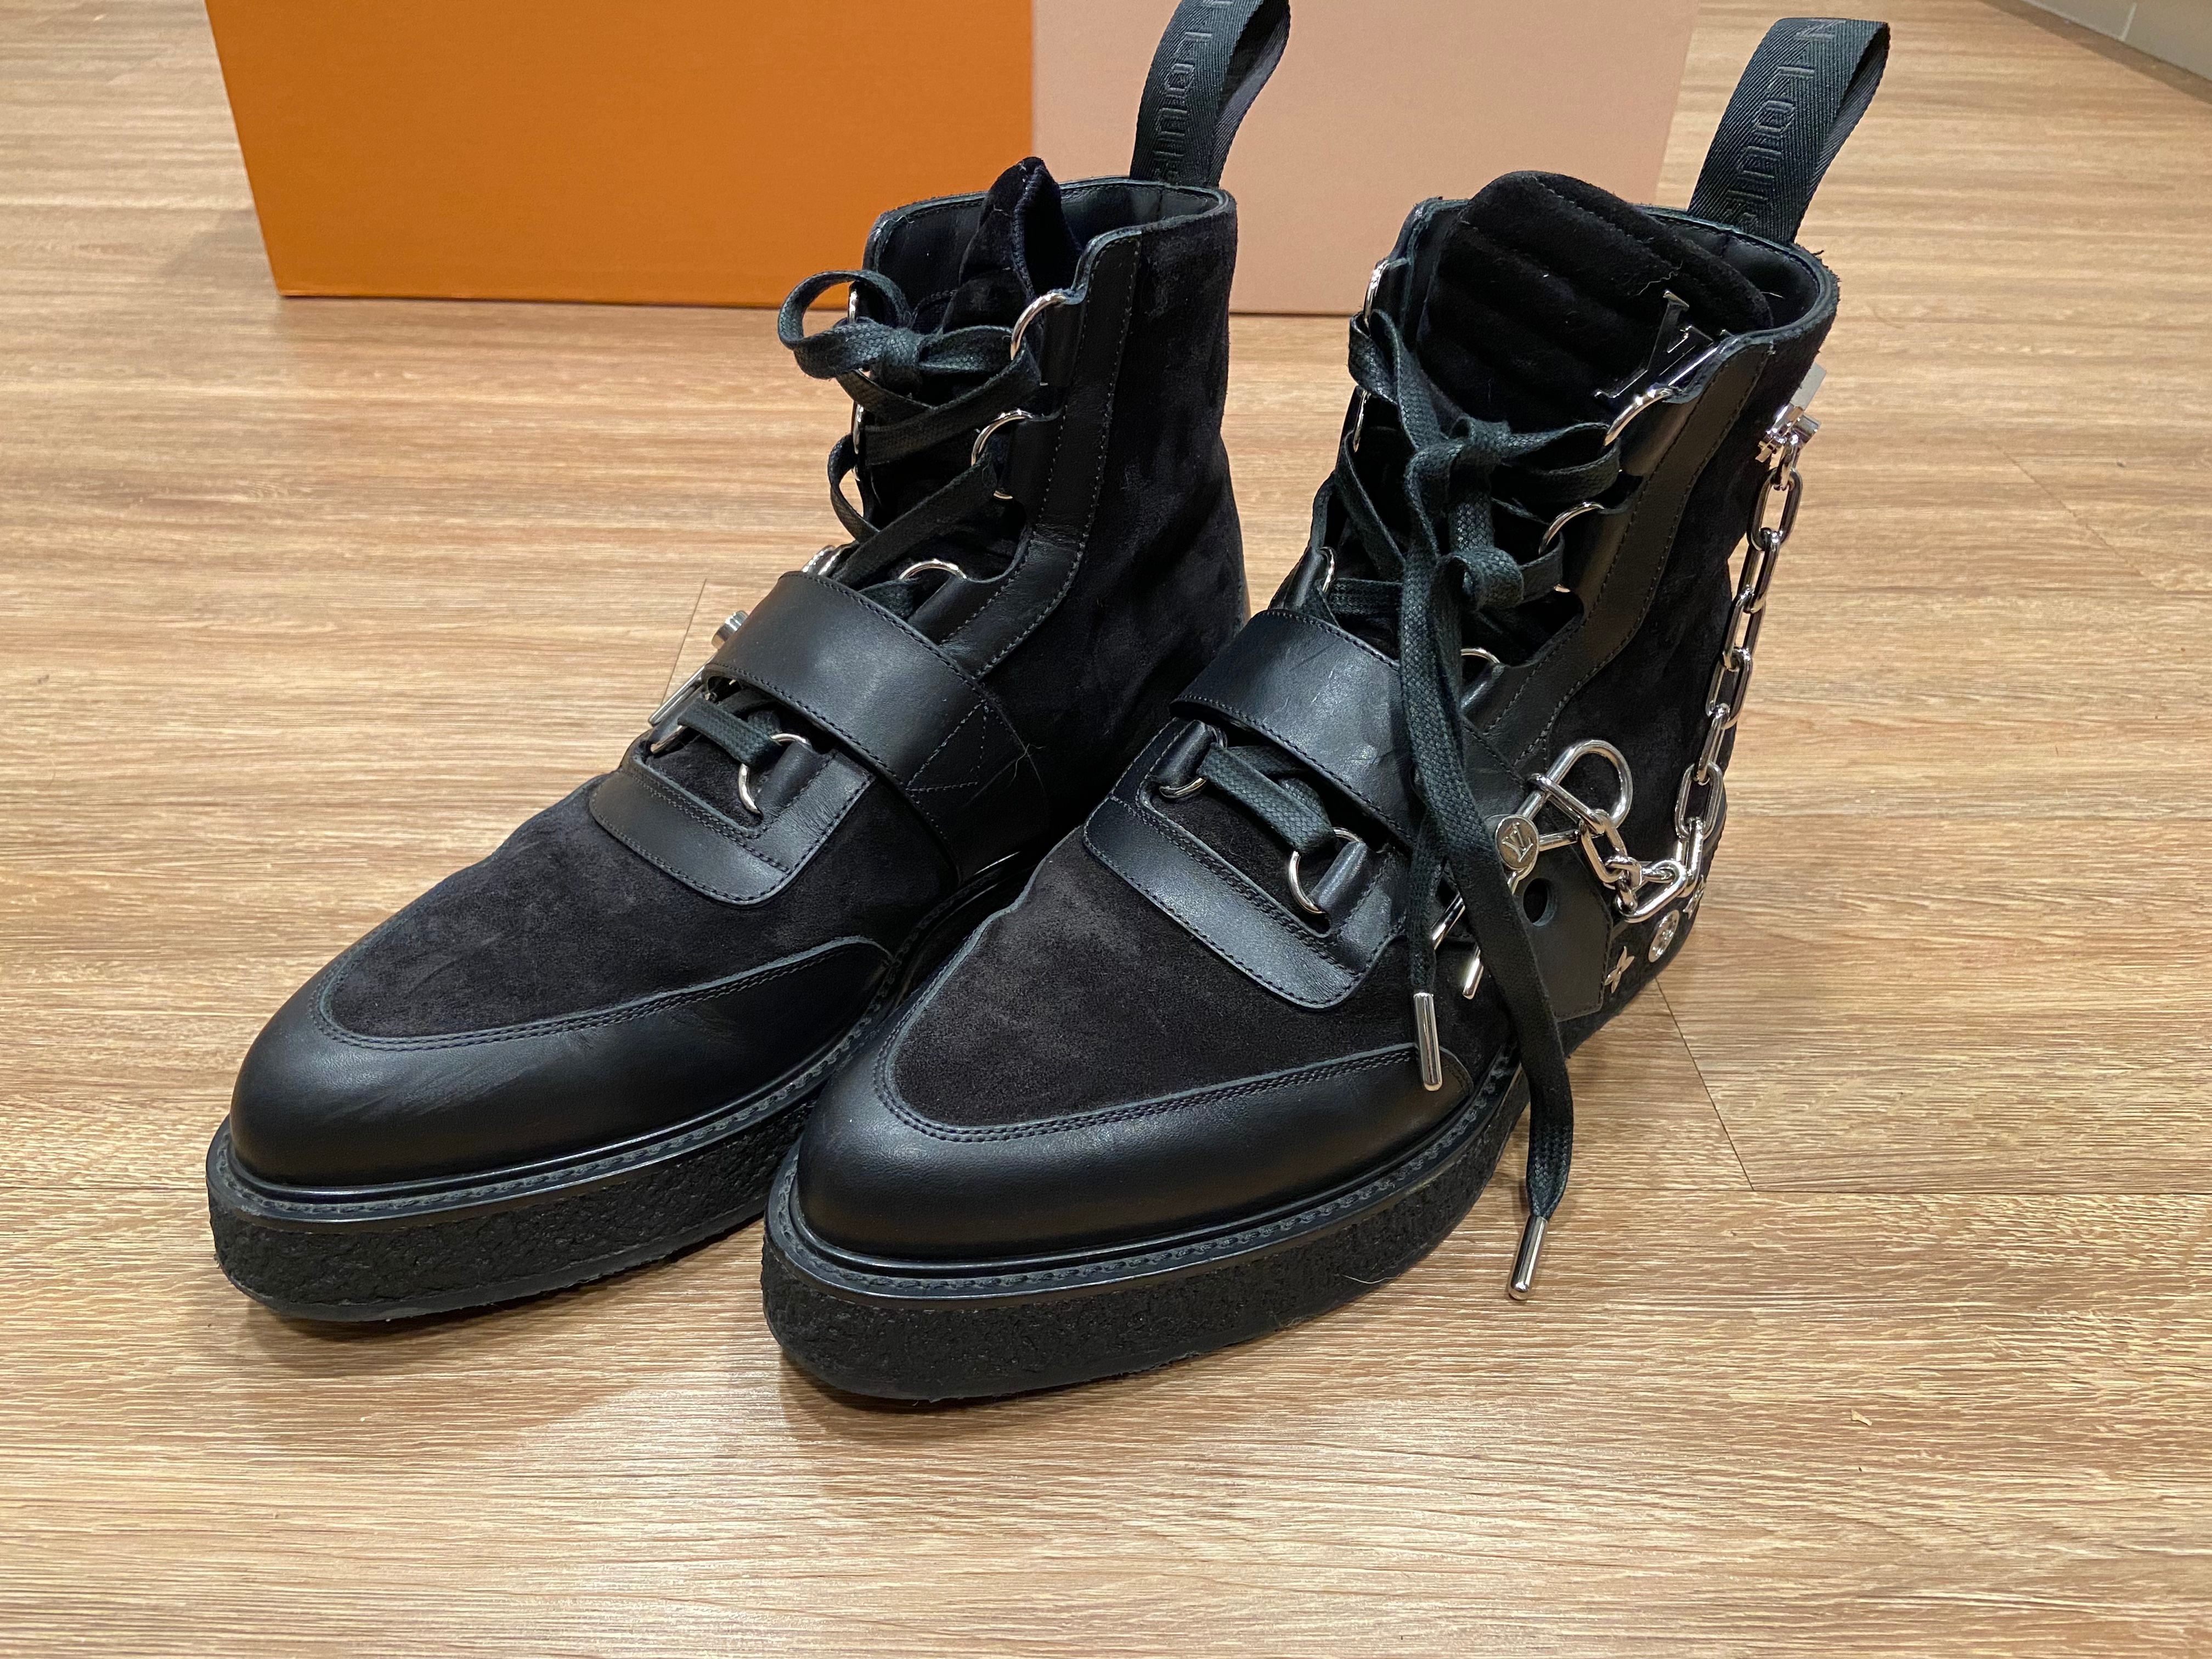 Louis Vuitton 1AAS83 LV Trainer Snow Snow Boot